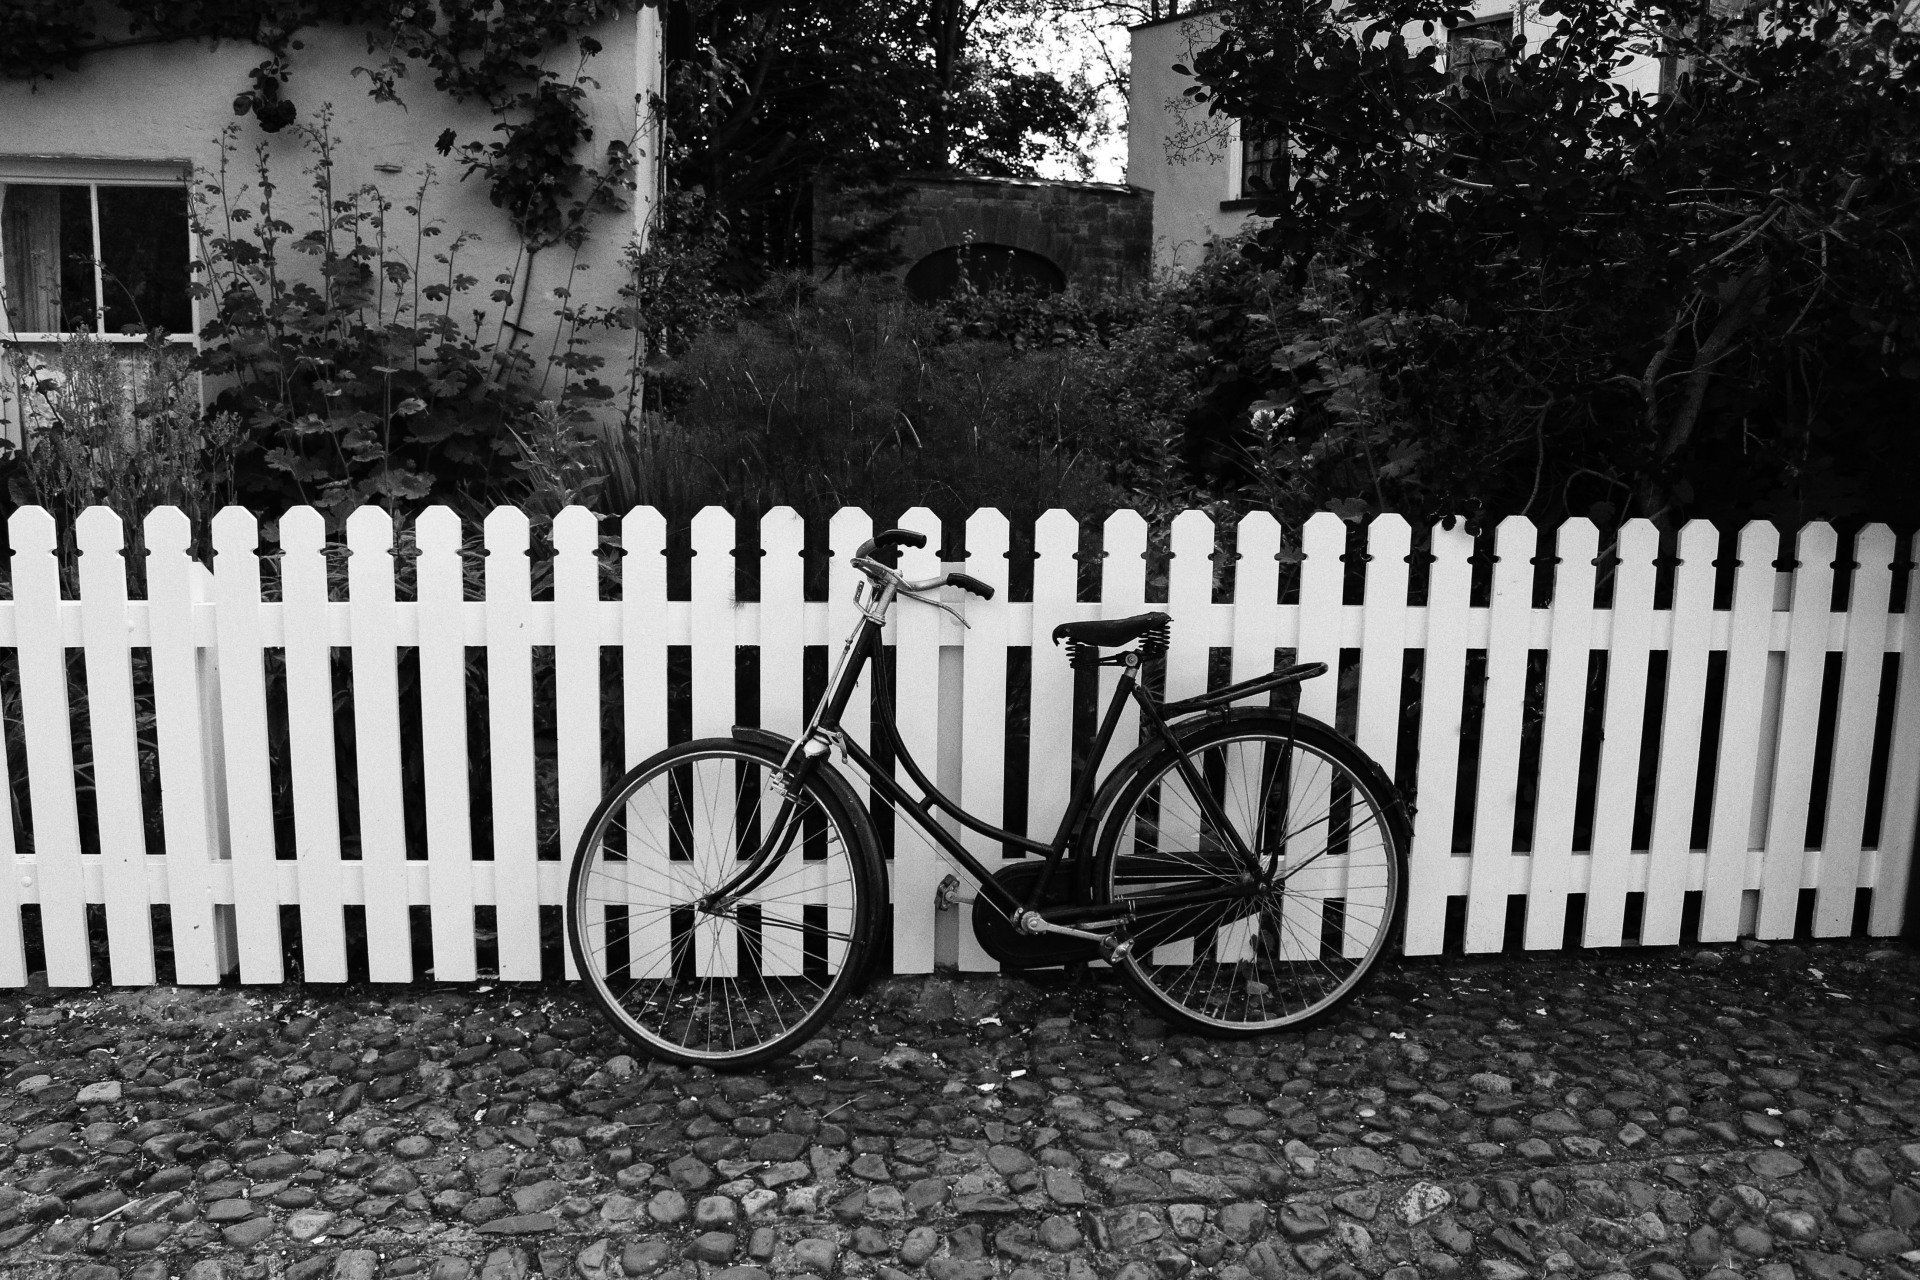 Classic wooden picket fence with an old bicycle in front with a house in back